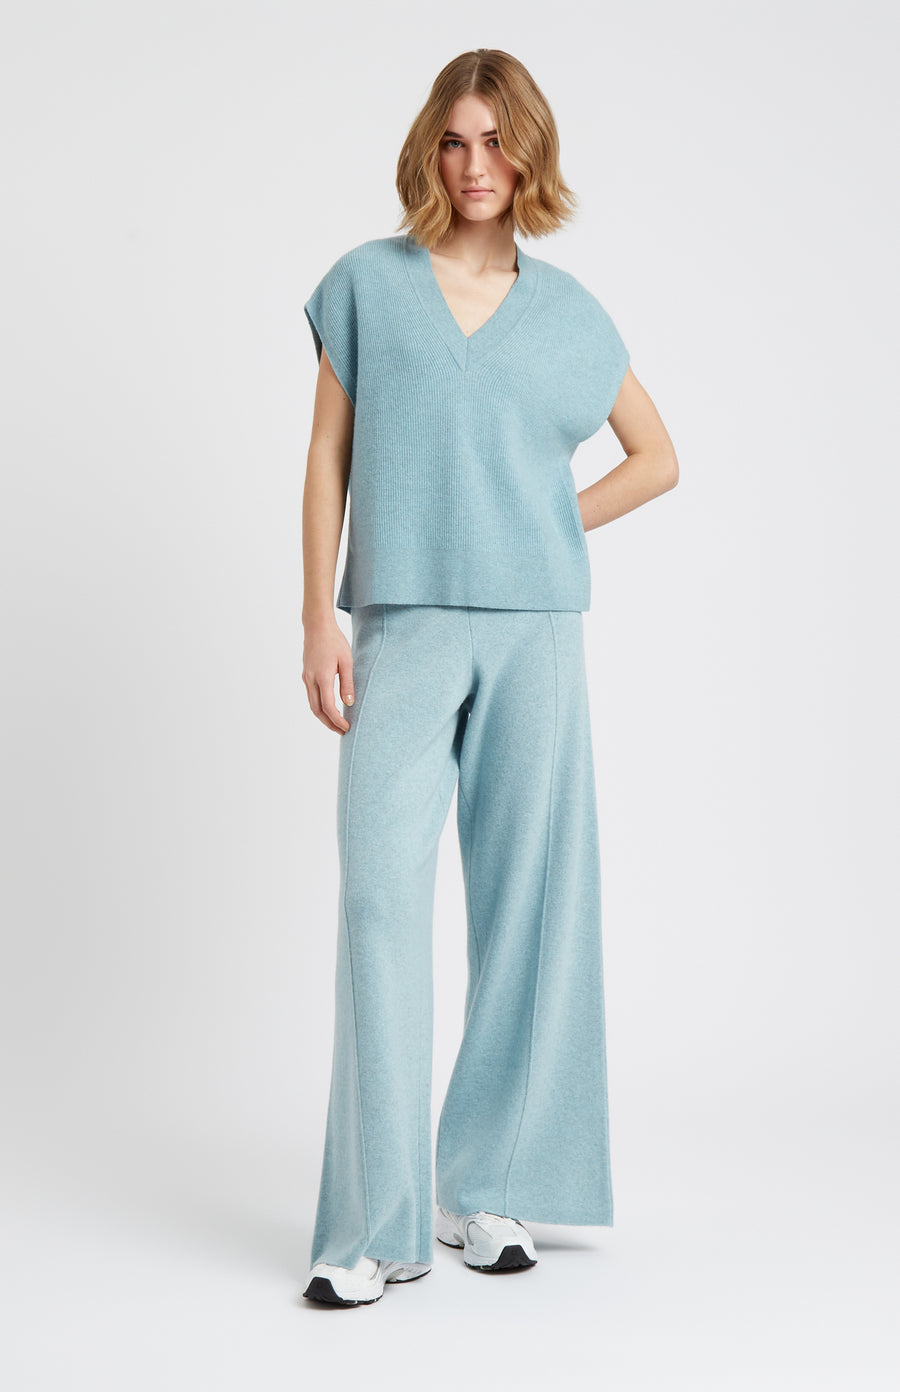 Pringle of Scotland V Neck Sleeveless cashmere blend jumper in Aqua with matching wide leg trouser